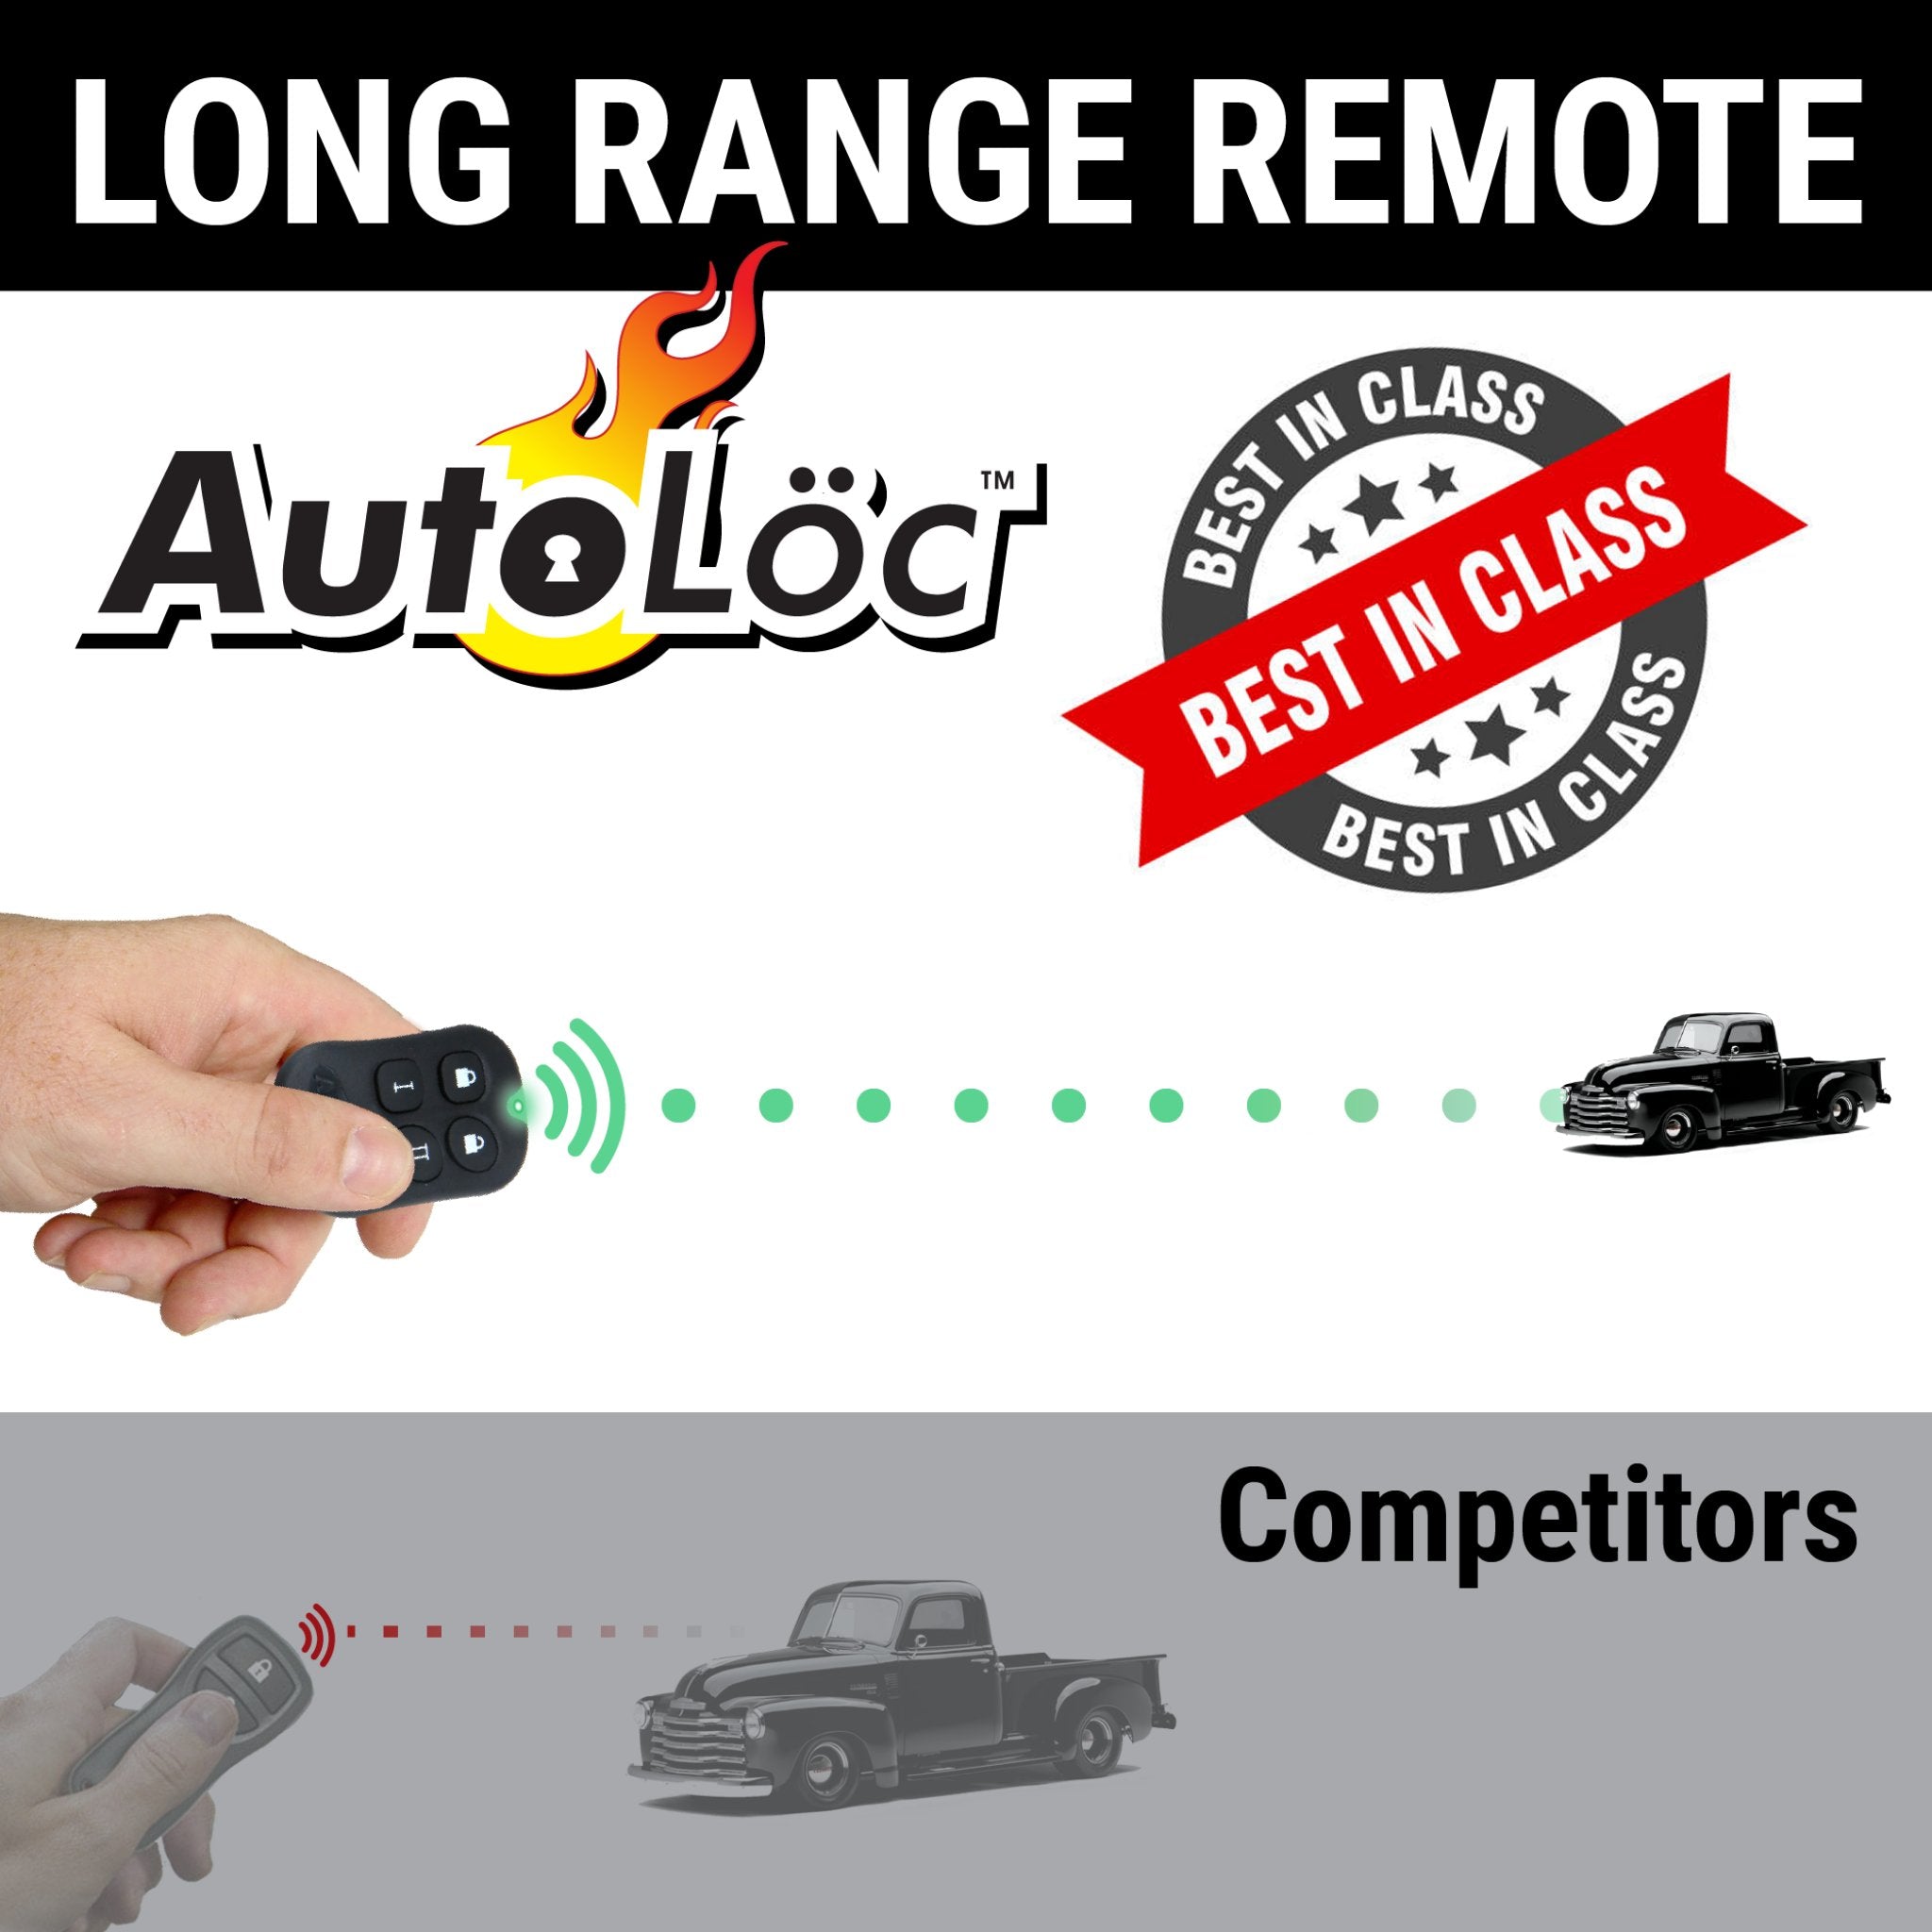 Autoloc 5 Channel 12V Remote Control Keyless Entry System Kit w/ Built-in Relays